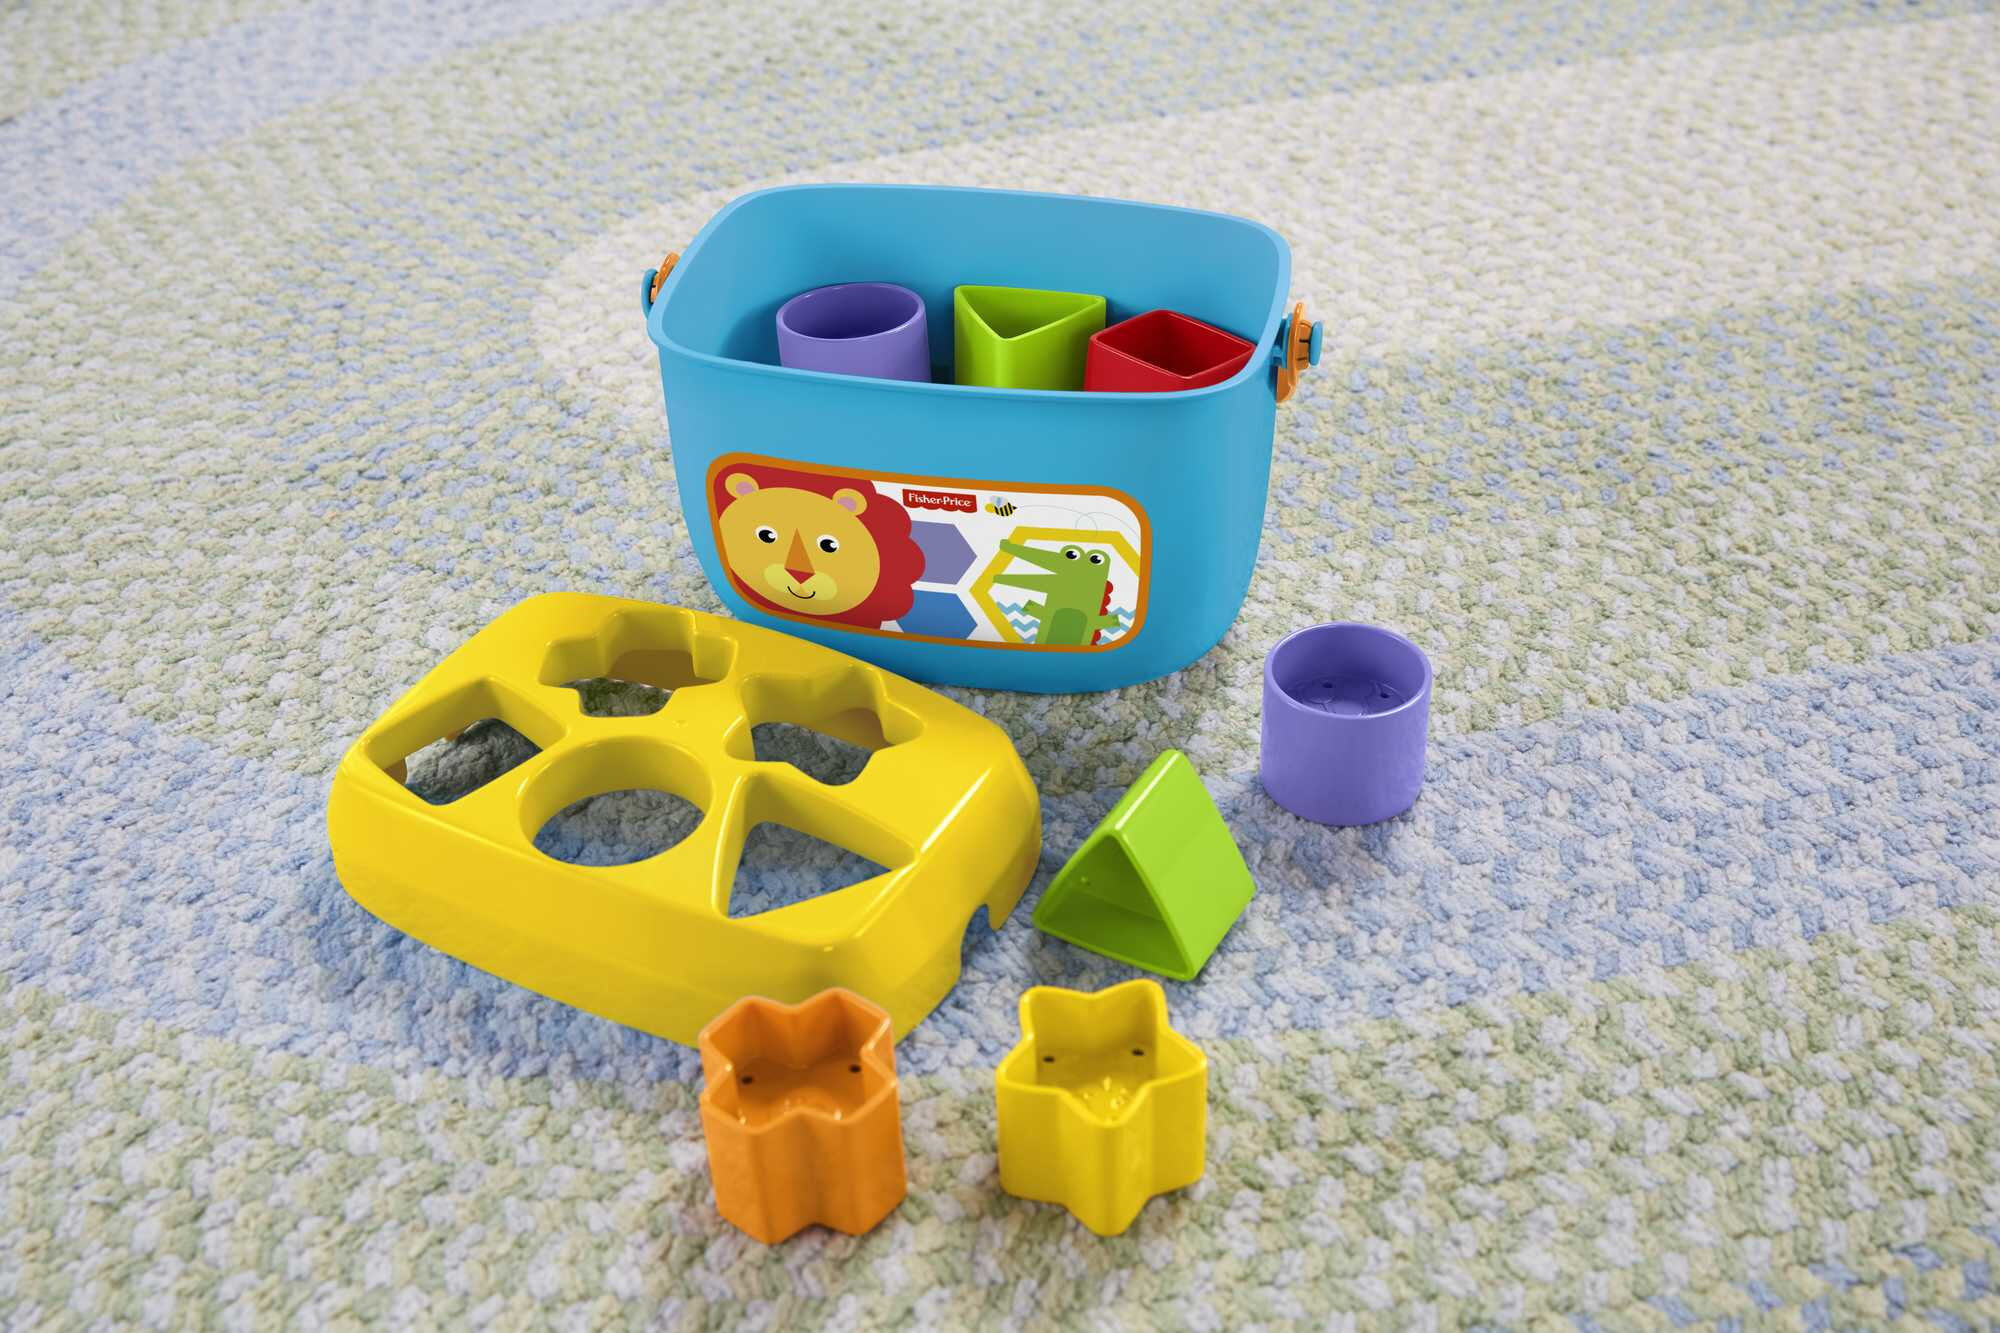 Fisher-Price Baby’s First Blocks Shape-Sorting Toy, Set of 10, for Infants 6+ Months - image 4 of 7